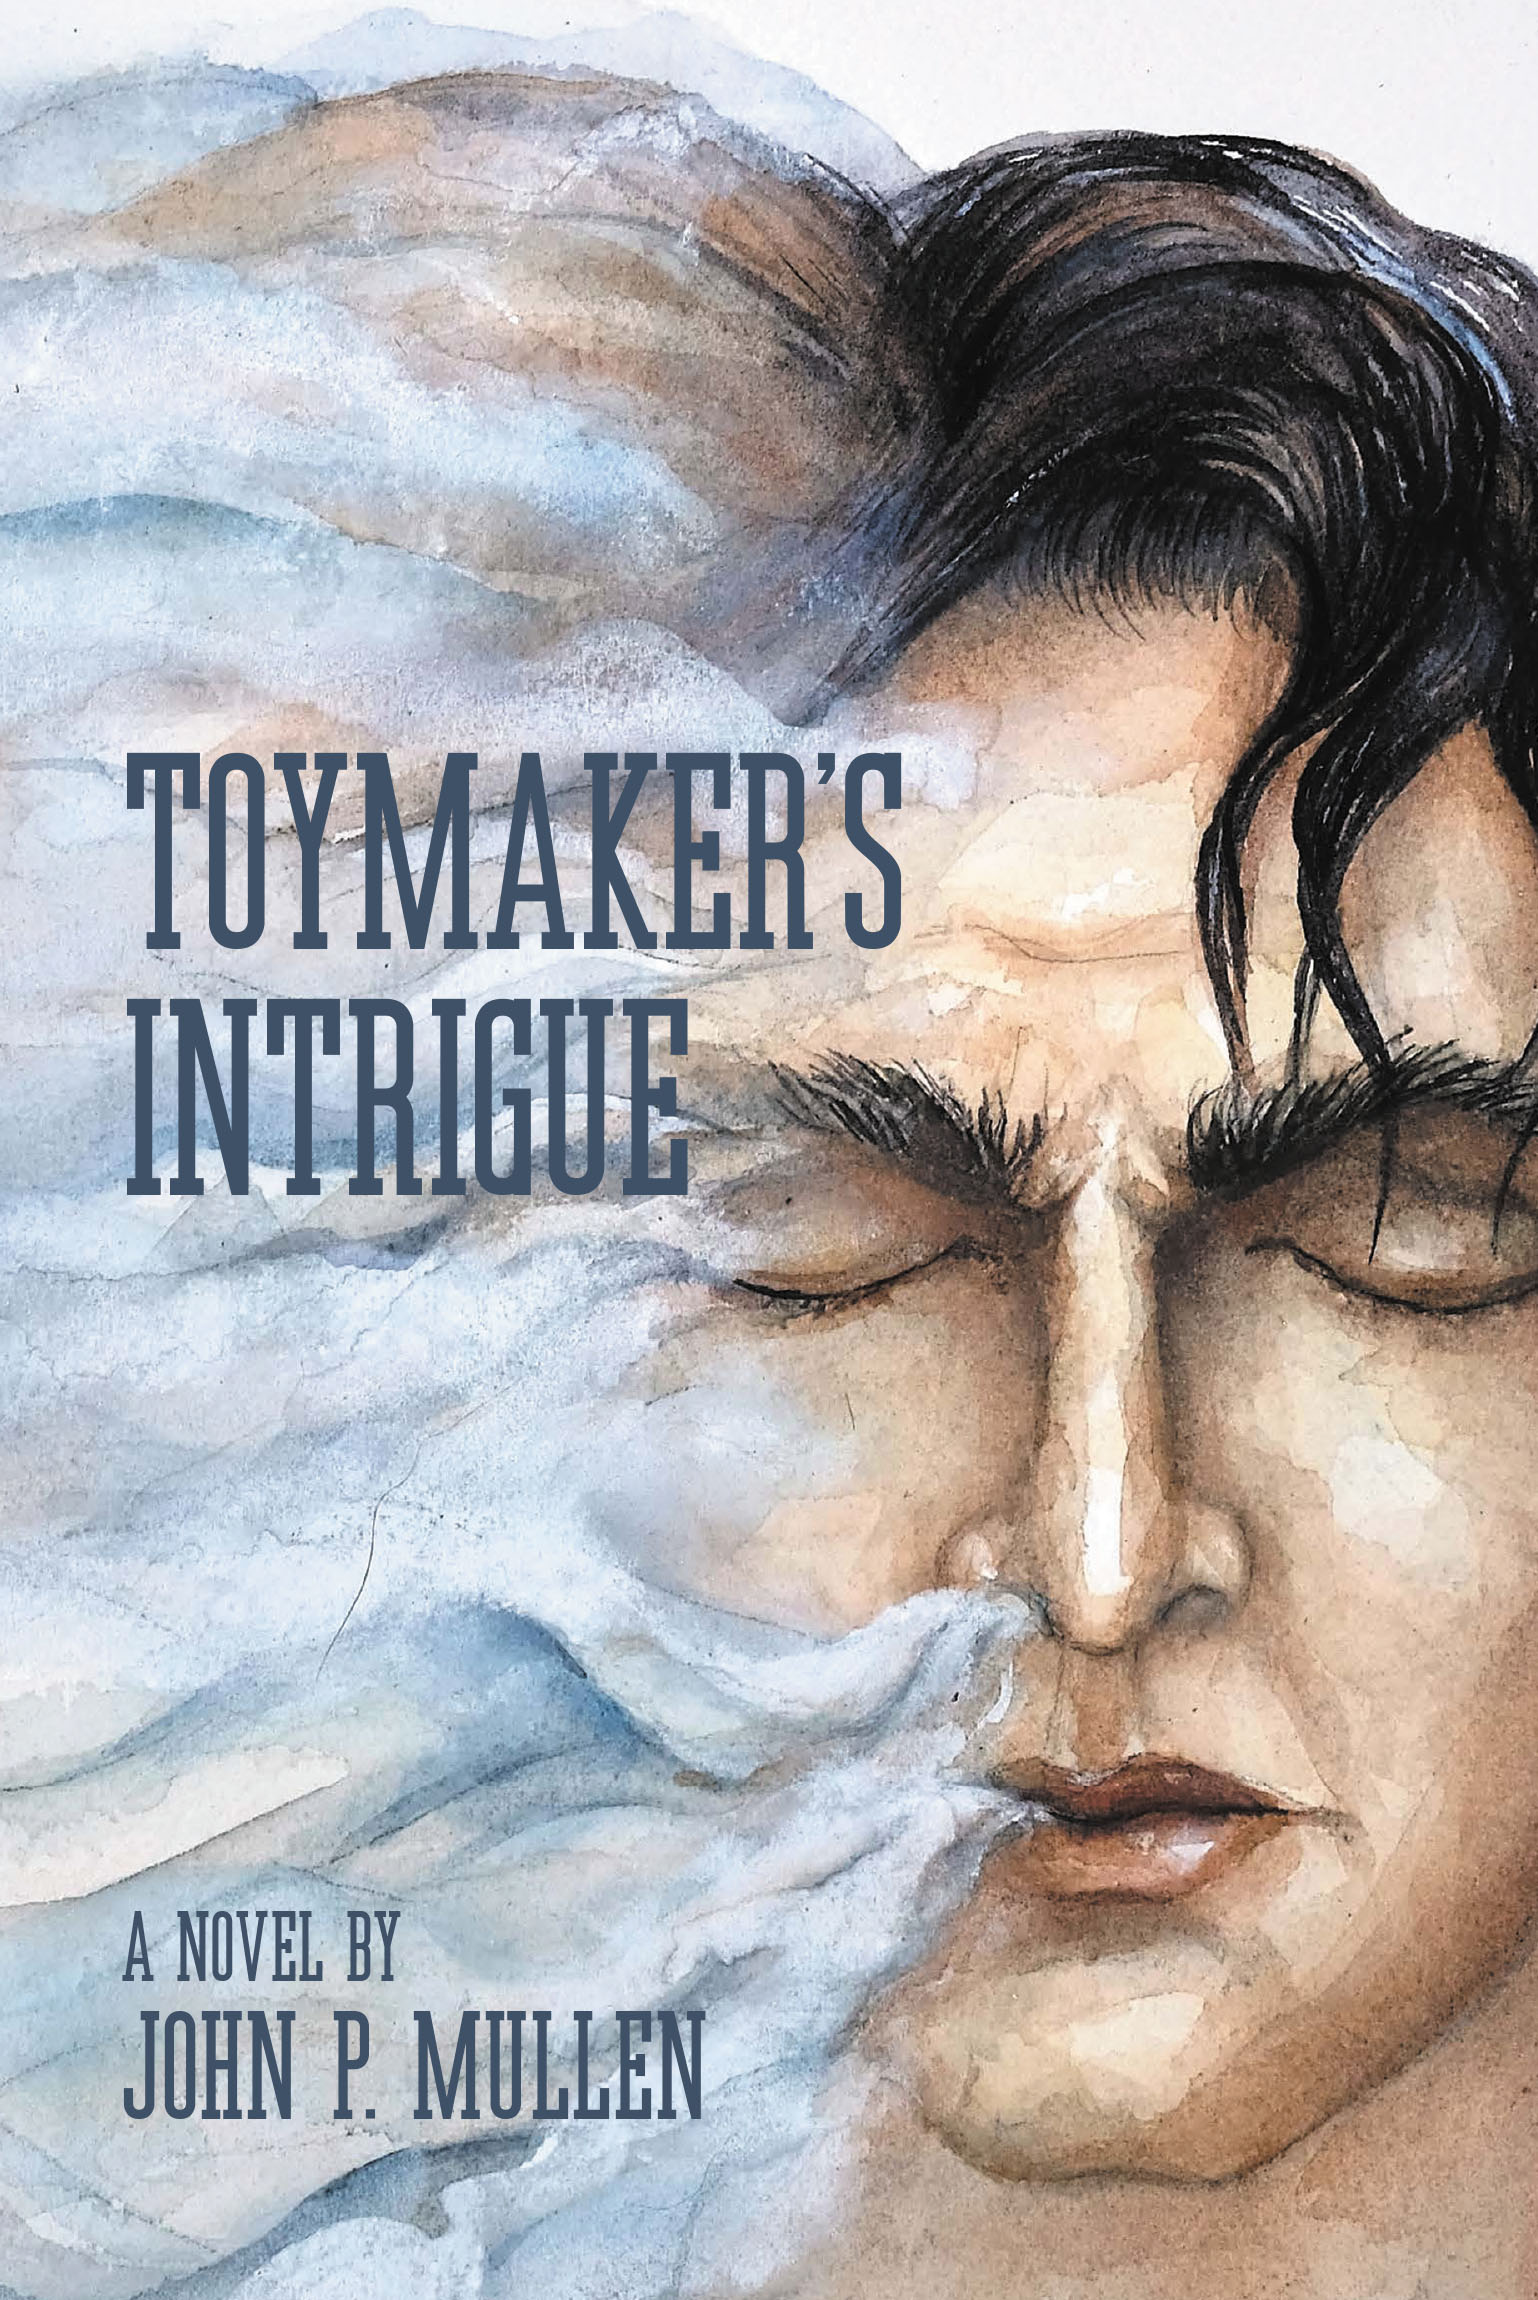 Author John P. Mullen’s New Book, "Toymaker's Intrigue," is a Thought-Provoking Tale That Explores What Could be Possible if Evidence of Other Dimensions Were Discovered